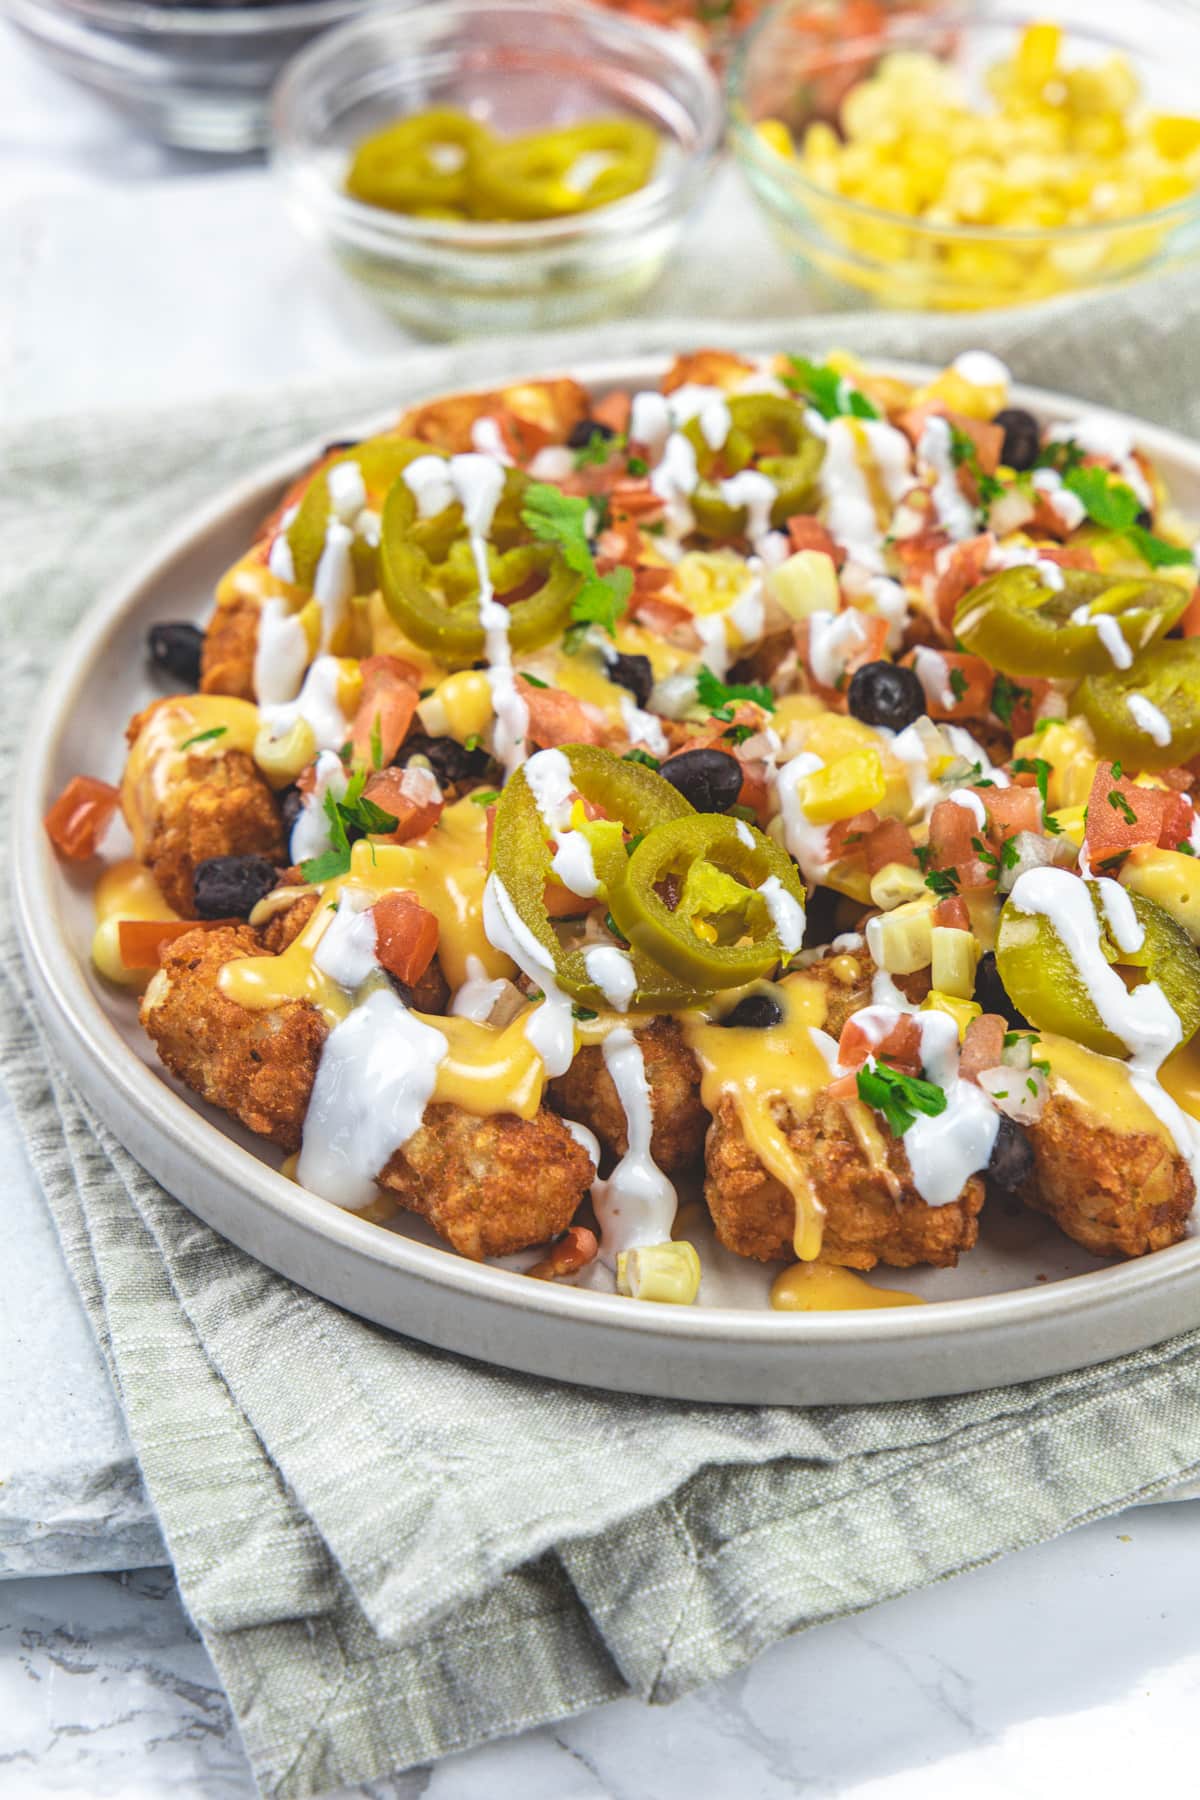 Totchos served in a plate.